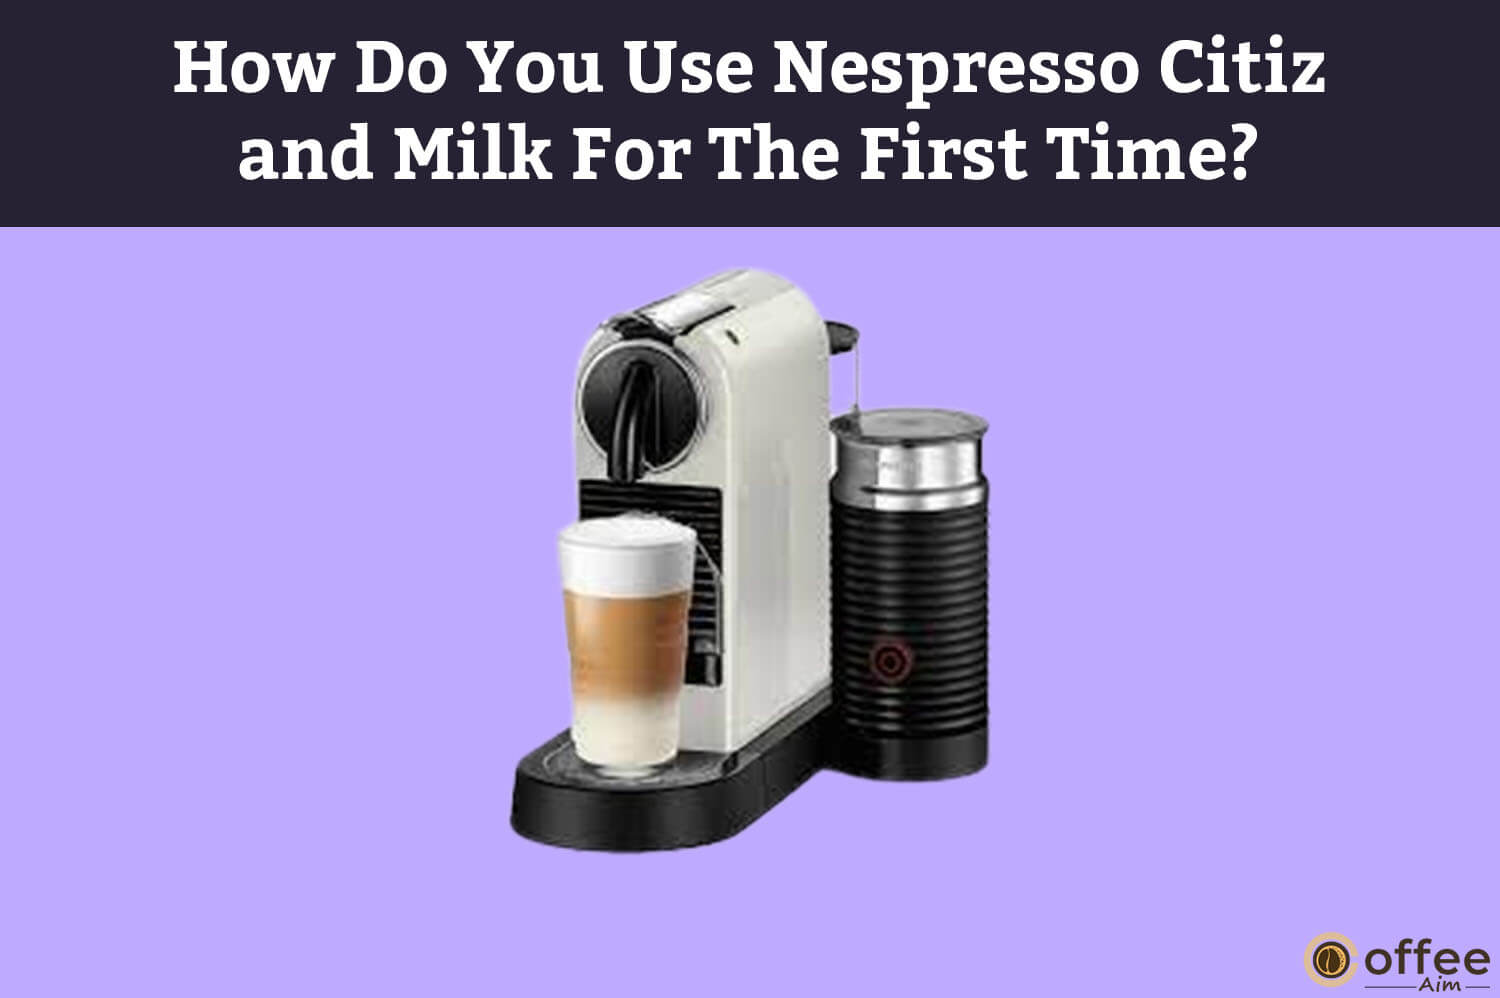 Featured image for the article "How Do You Use Nespresso Citiz and Milk For The First Time?"